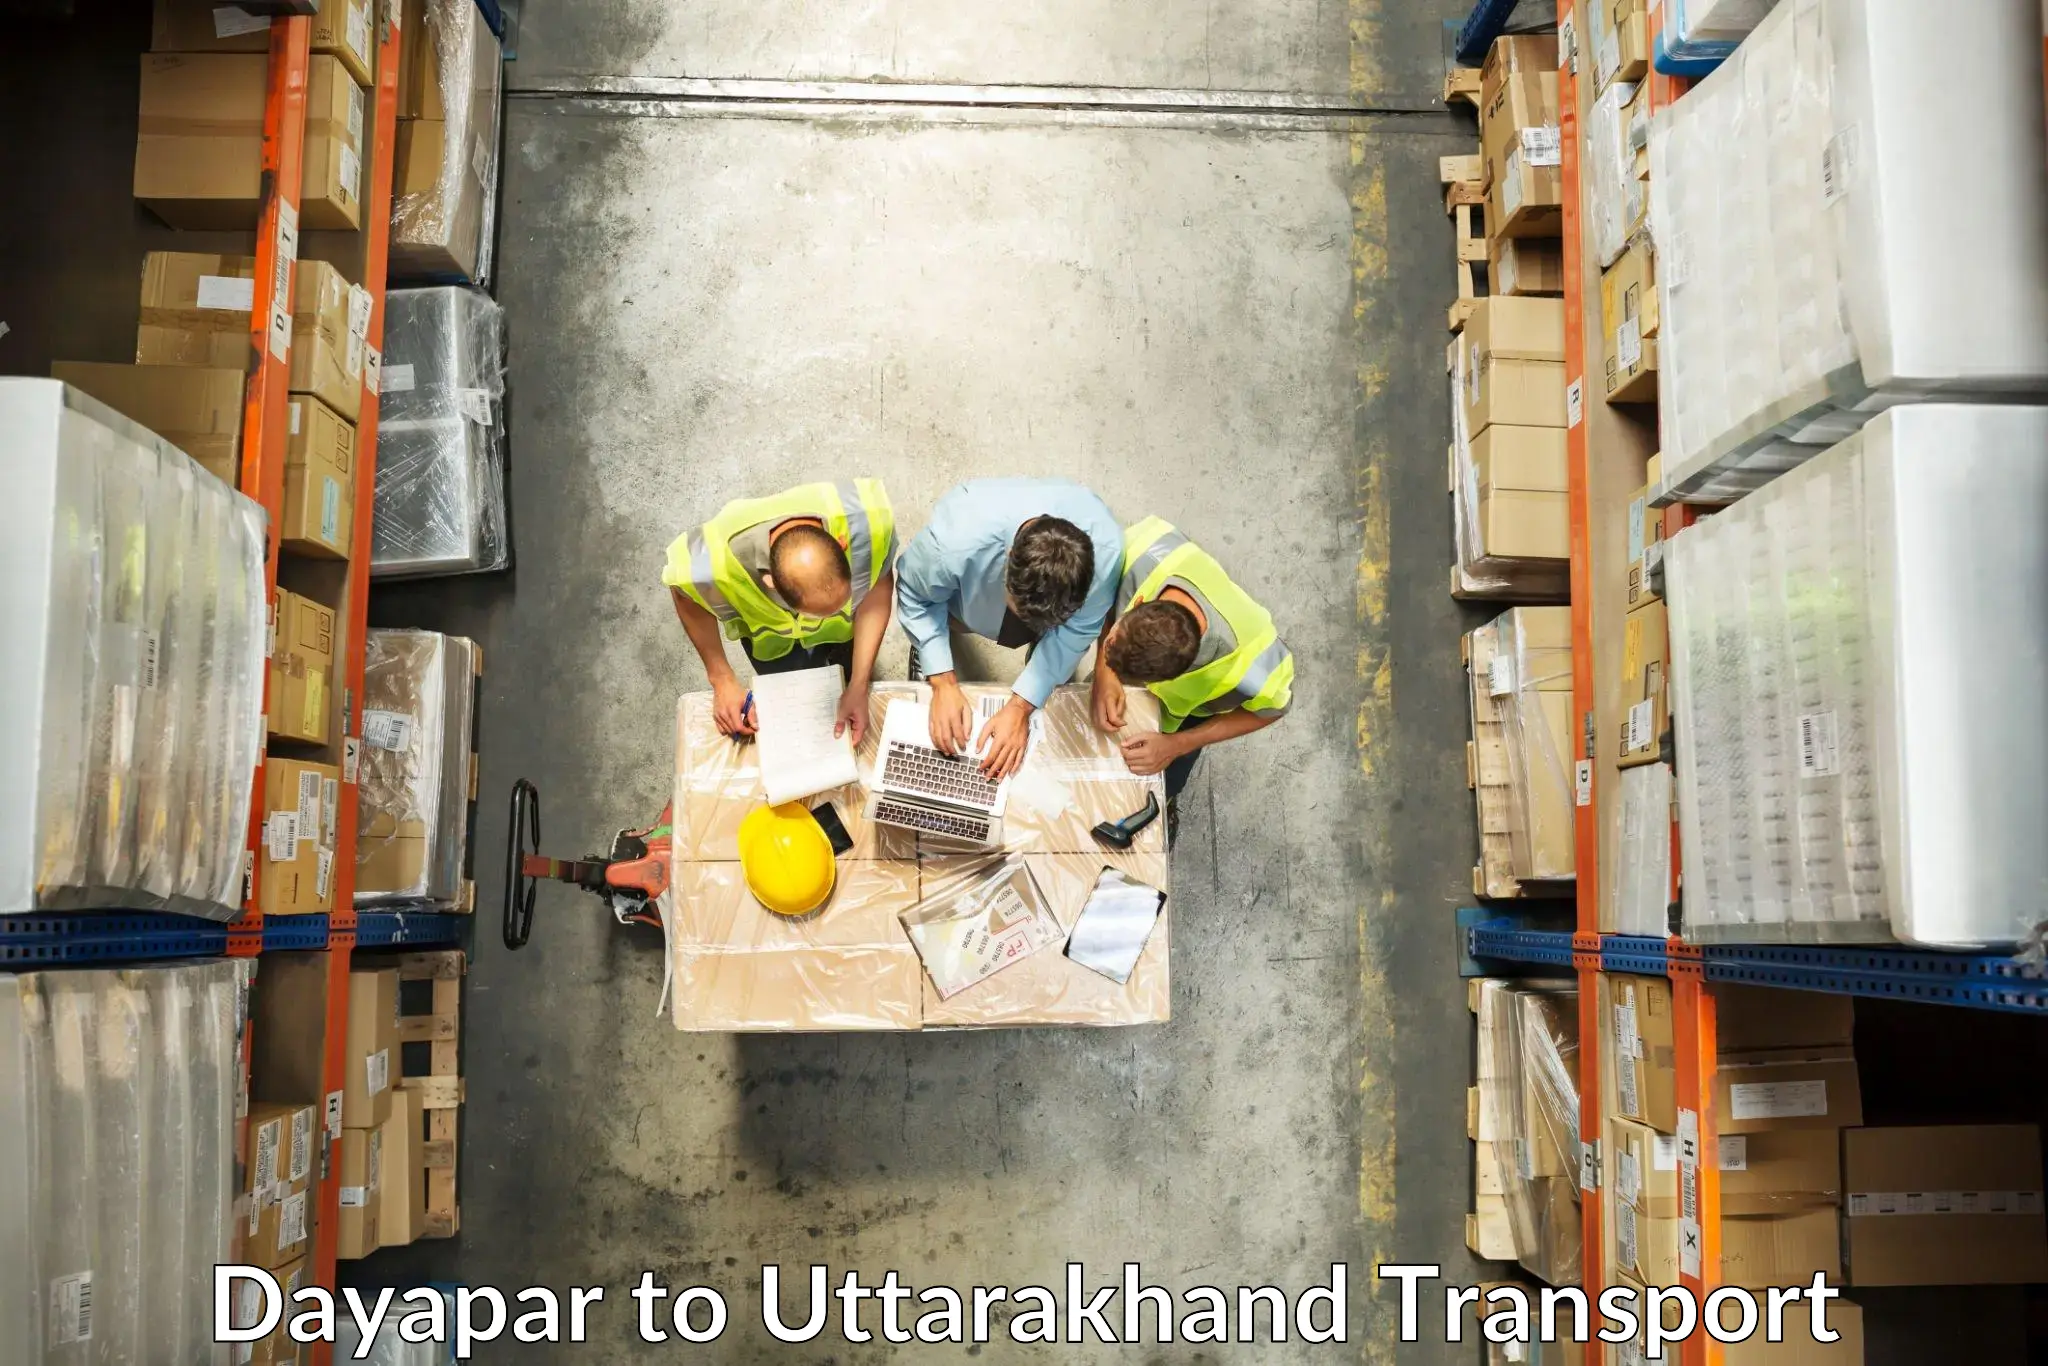 Part load transport service in India Dayapar to Rudrapur